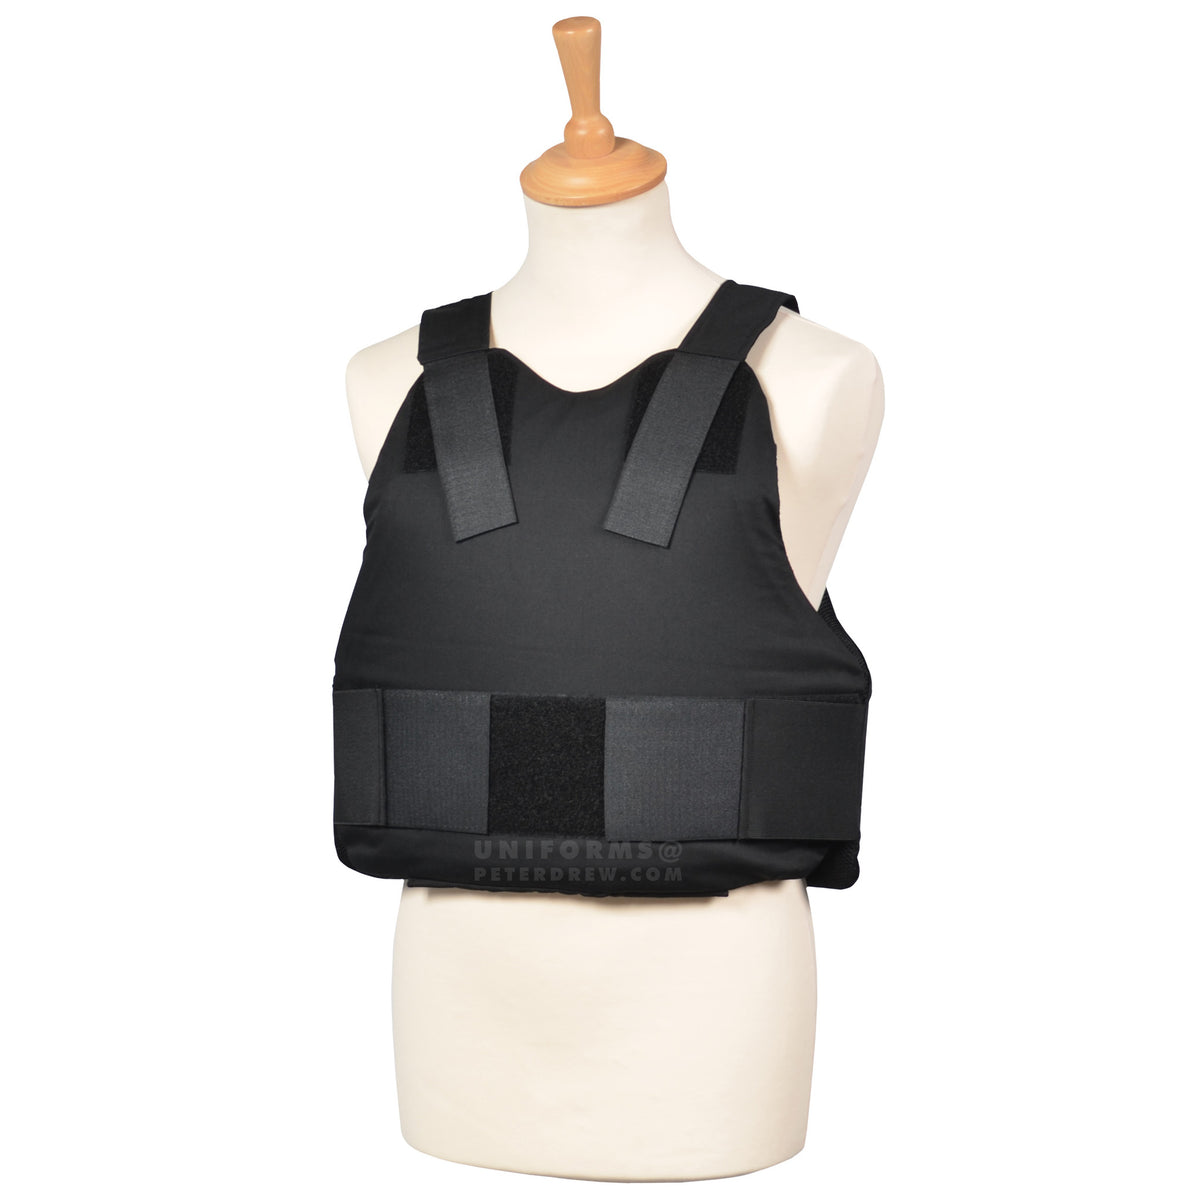 Body Armour Replacement Covers - peterdrew.com
 - 3